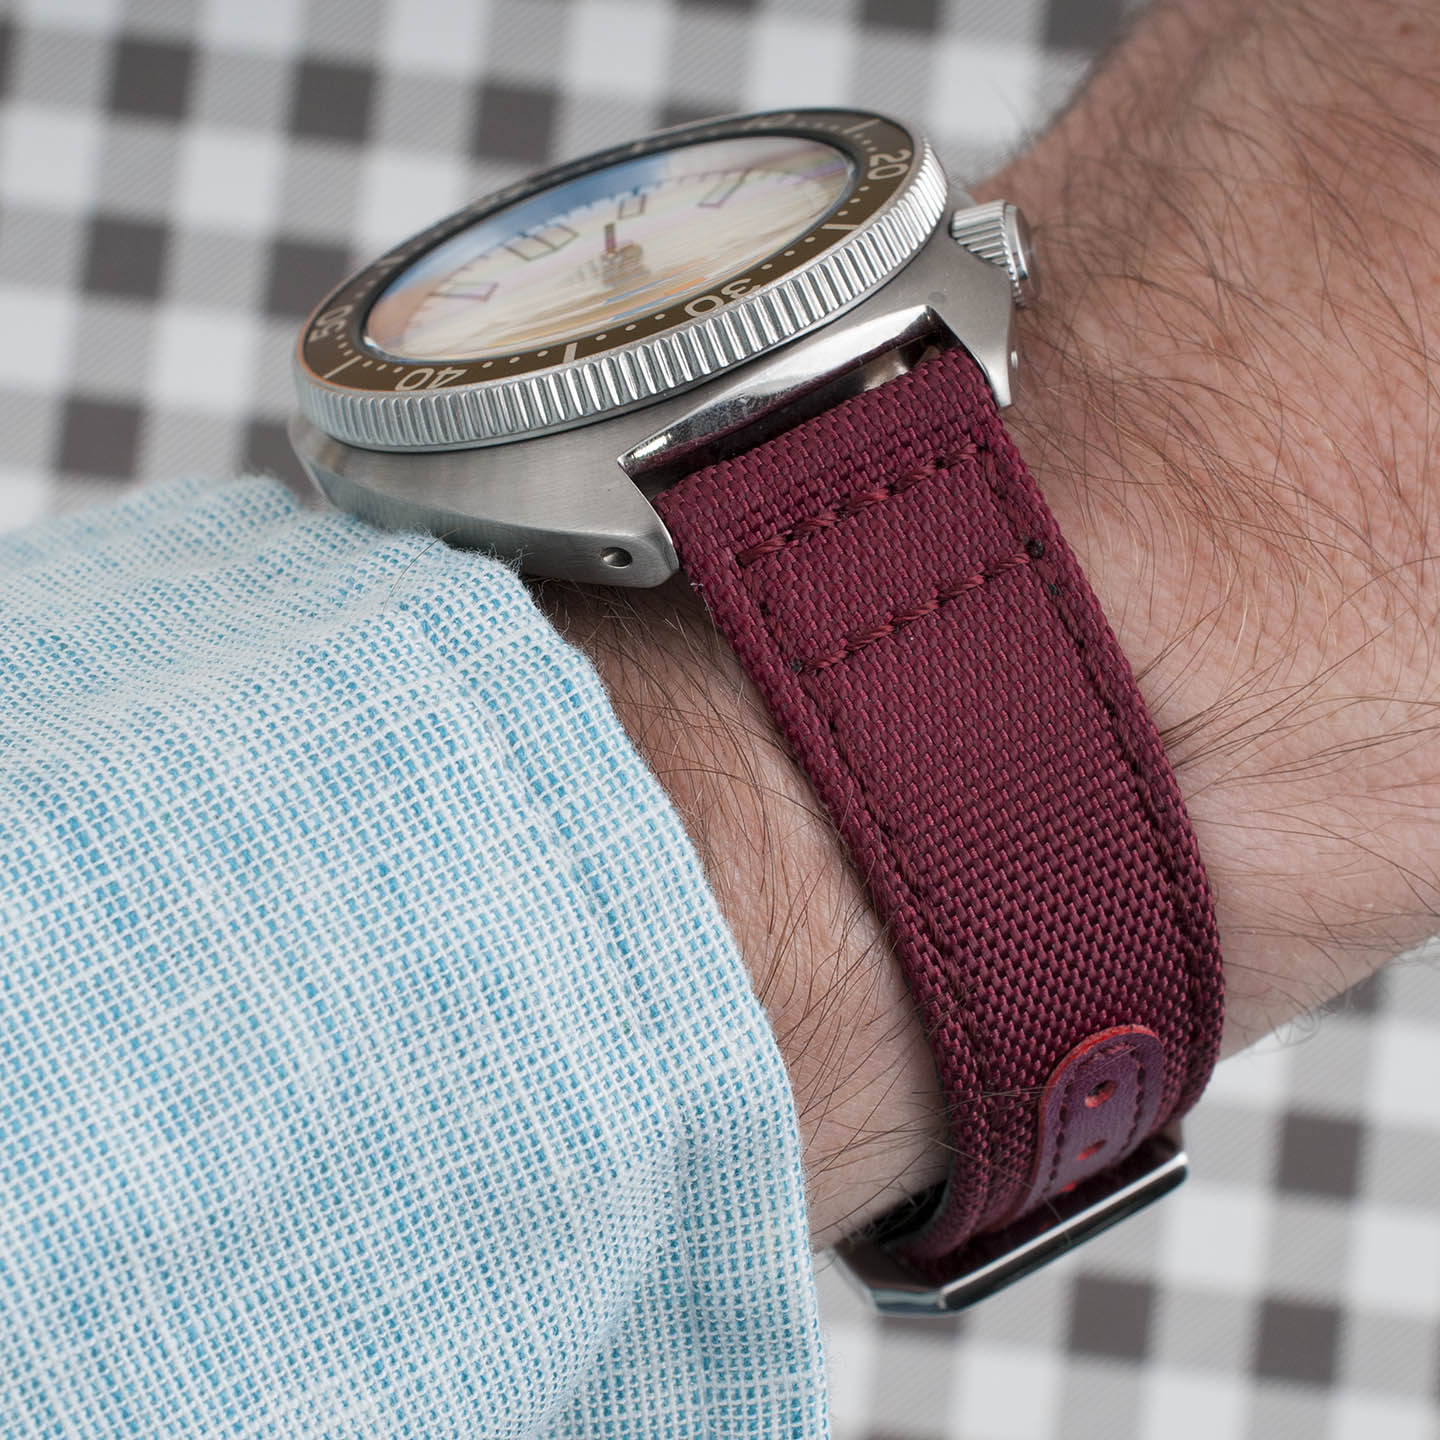 Premium Sailcloth Colorway Quick Release Watch Strap band replacement 19mm, 20mm, 21mm, 22mm for large wrists and small wrists, for men and women, unisex burgundy maroon dark red wine